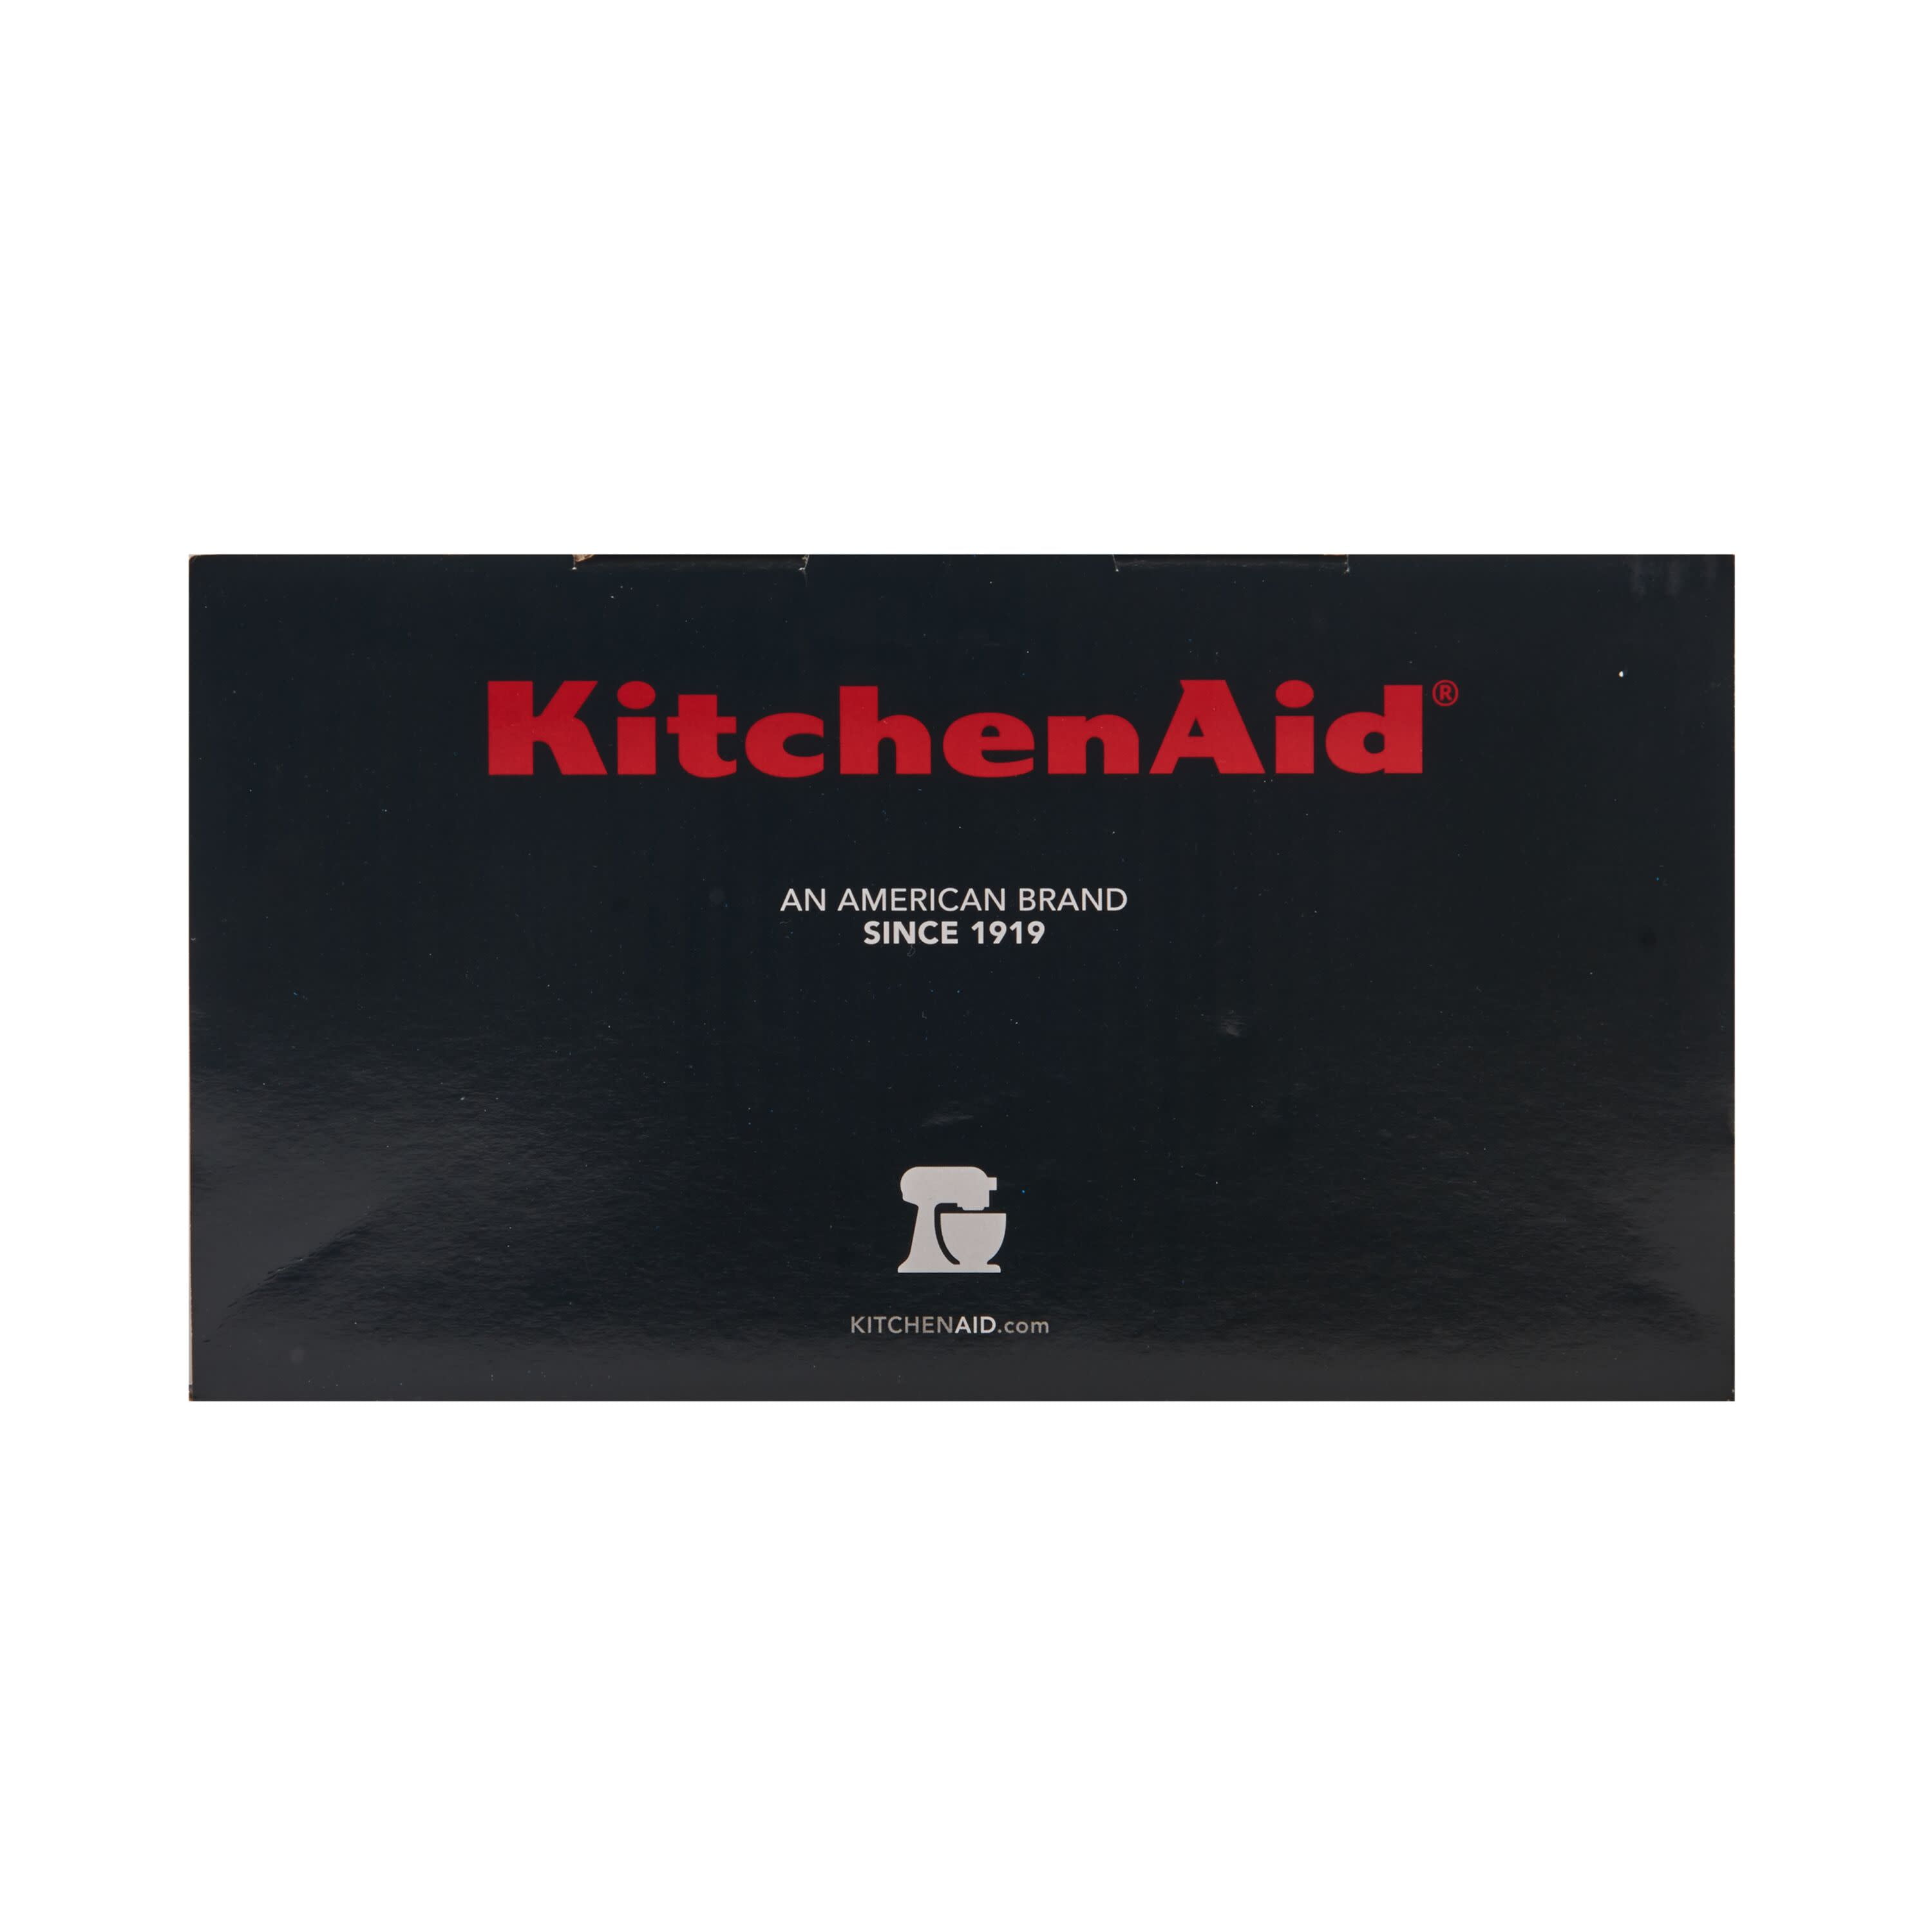 Finest kitchenware Ghana - 💥new in 💥 Price:¢300 KitchenAid 5 Piece  Gourmet Tool Set Product Details The KitchenAid Nylon 5 Piece Gourmet Tool  Set features all the necessities for everyday kitchen tasks.